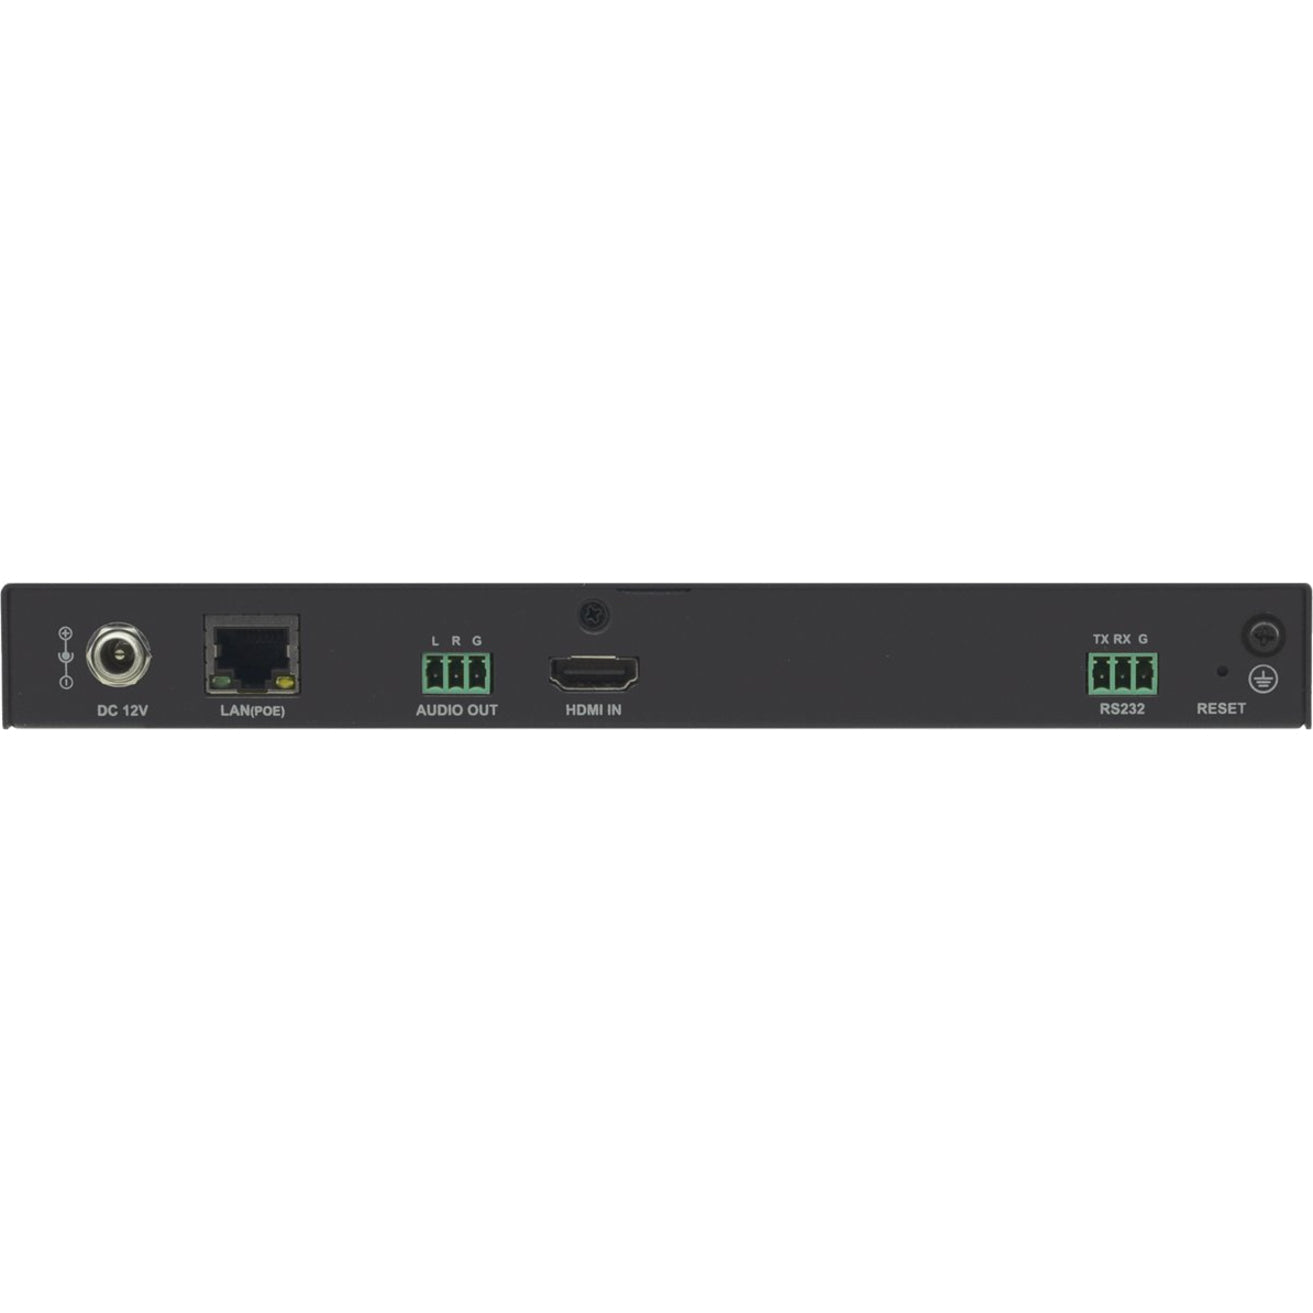 Kramer 4K60 4:2:0 H.264 Video Encoder supporting PoE and Video Wall